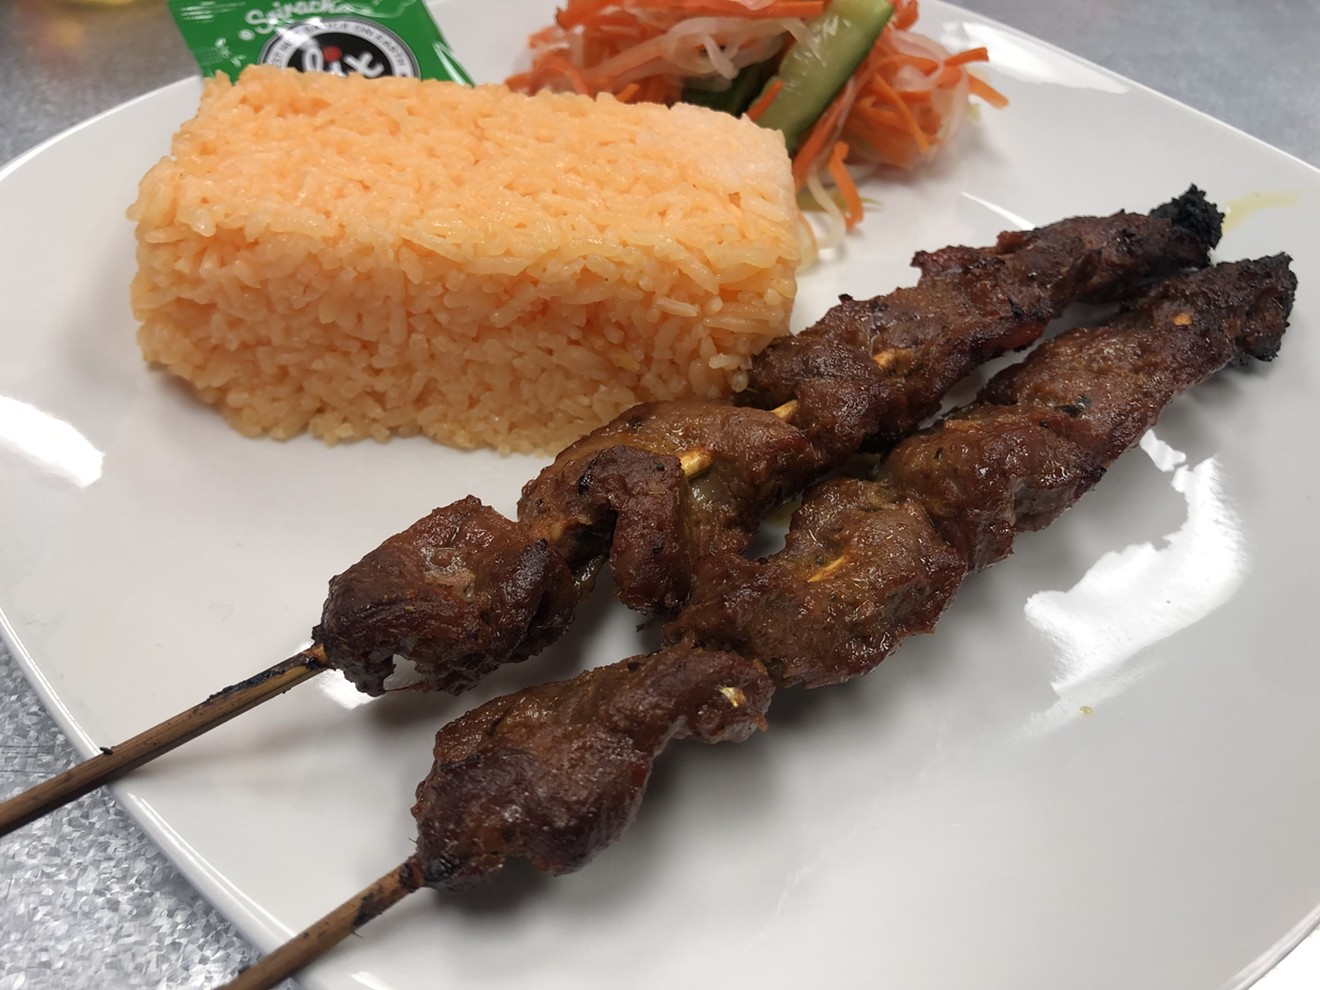 Grilled beef skewers from Thaily Restaurant in Chandler